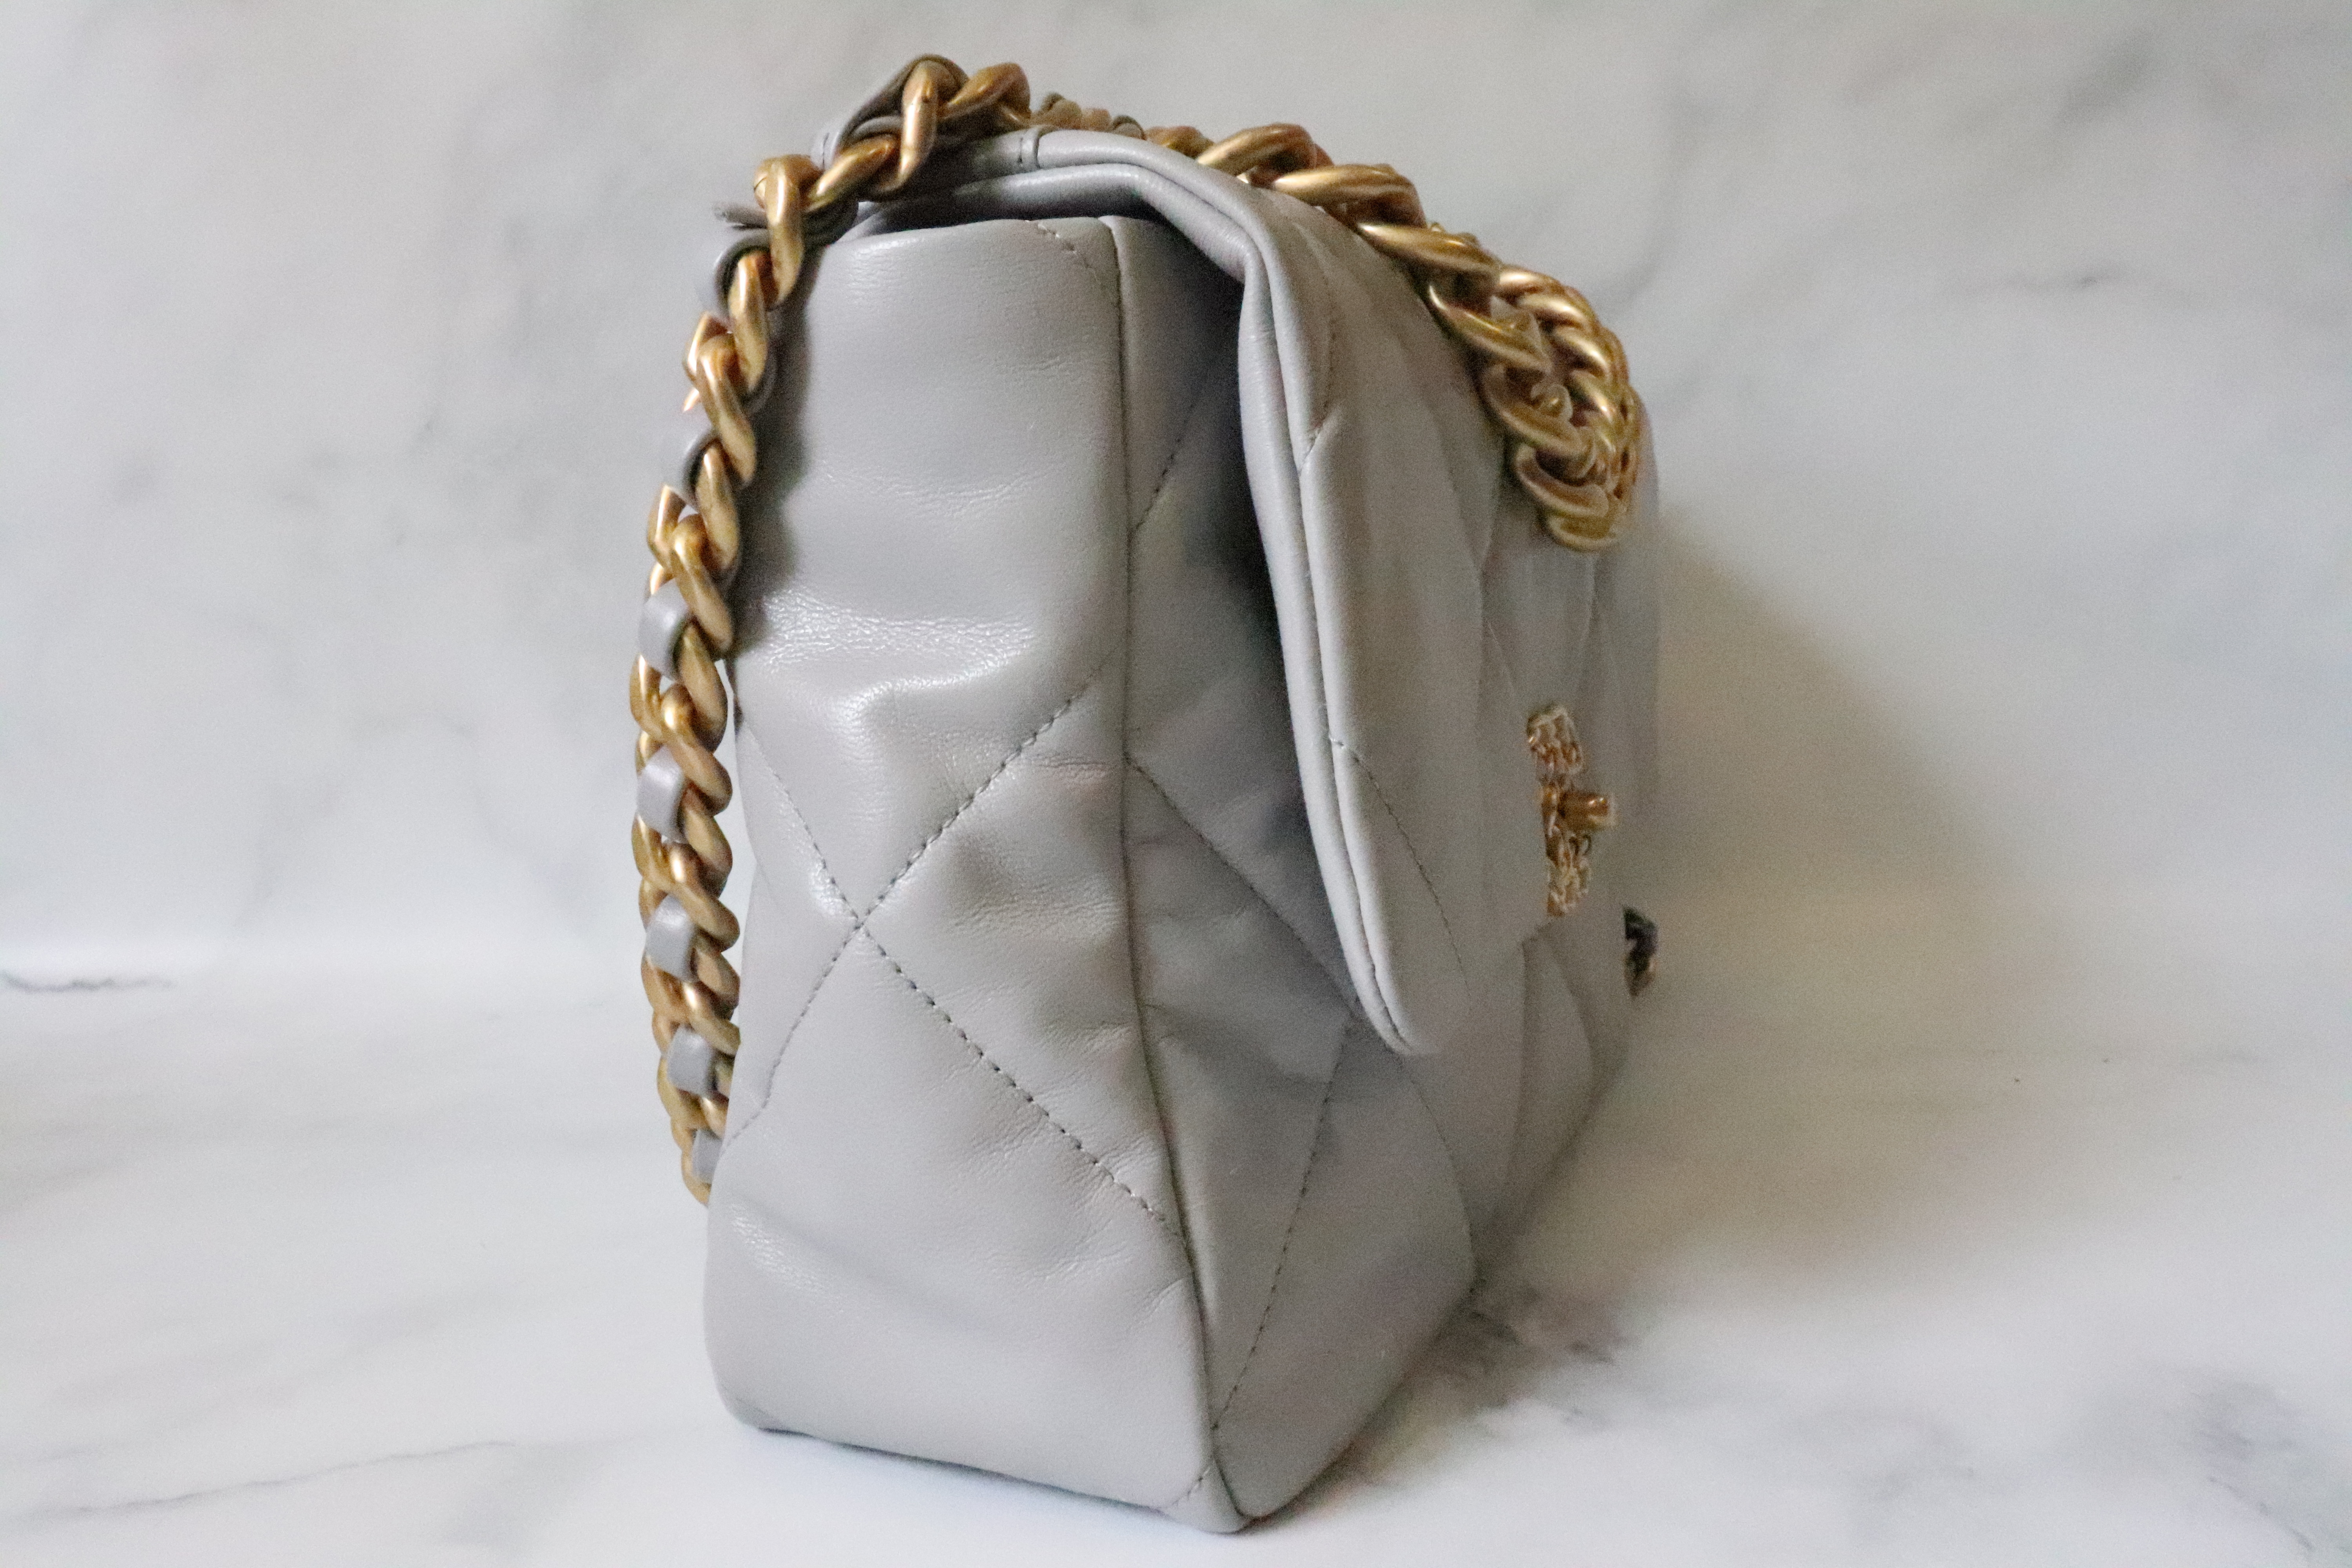 Chanel 19 Large, Grey Leather, Preowned in Dustbag WA001 - Julia